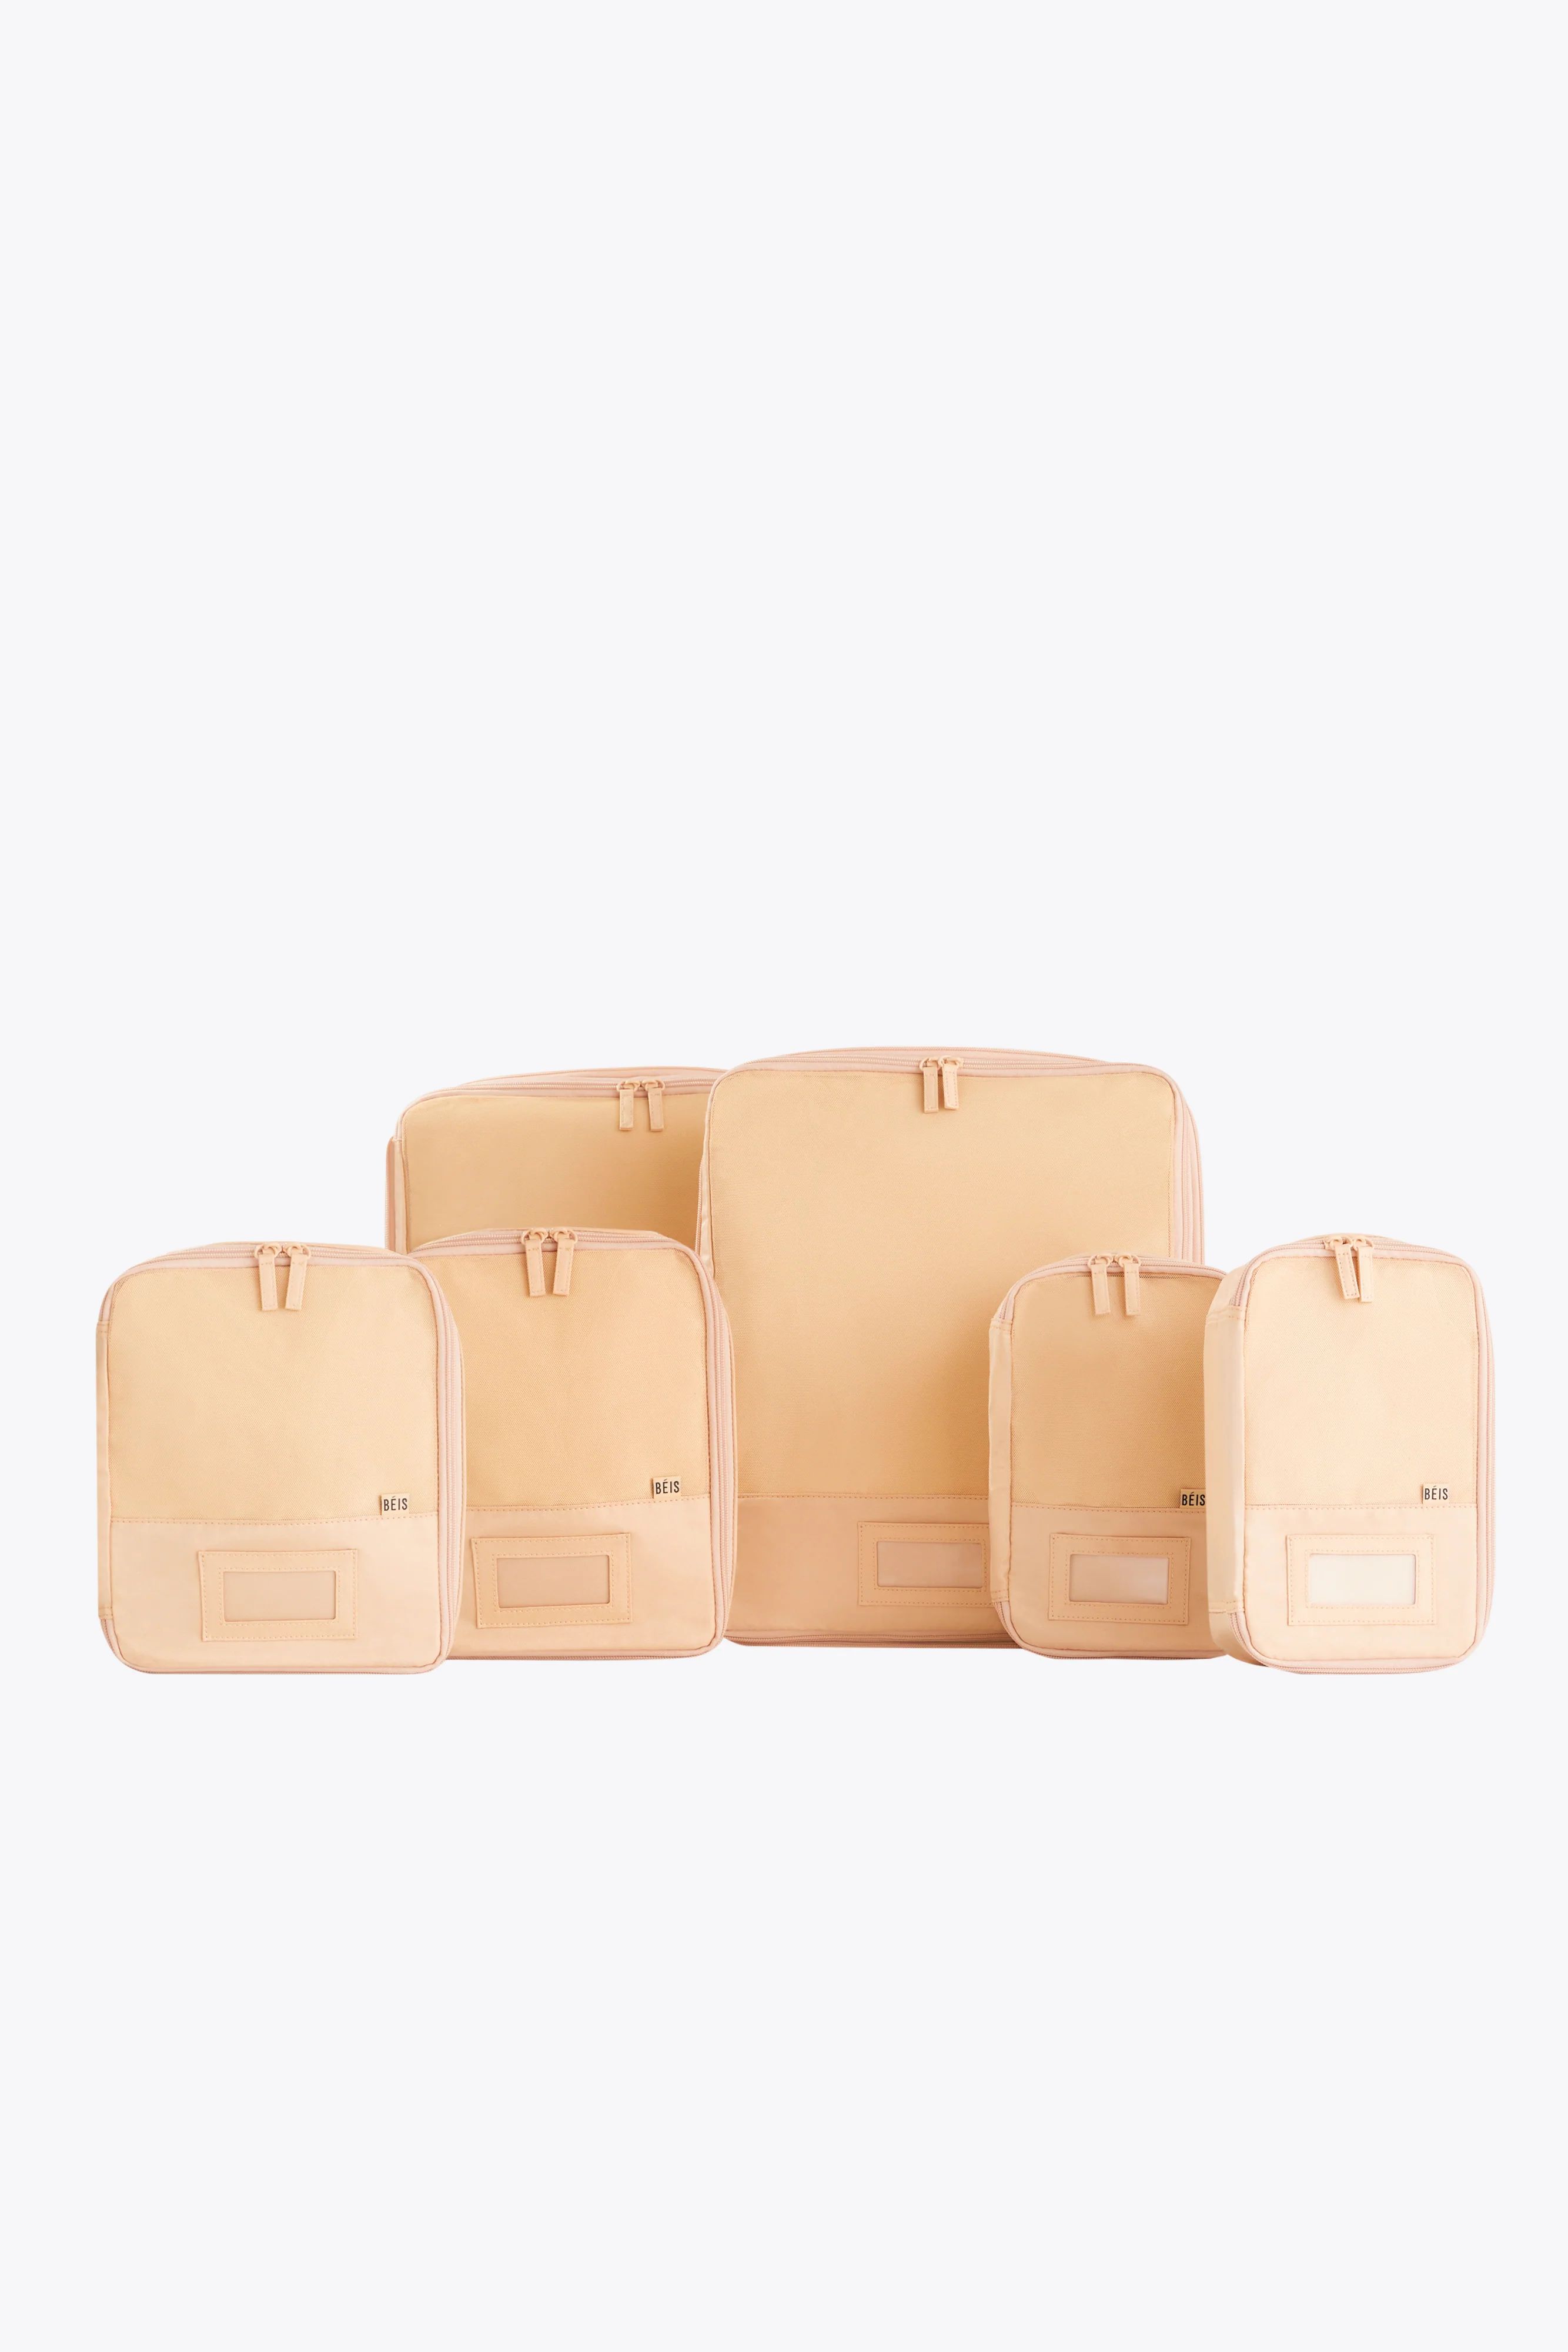 THE COMPRESSION PACKING CUBES 6 PC IN BEIGE | BÉIS Travel